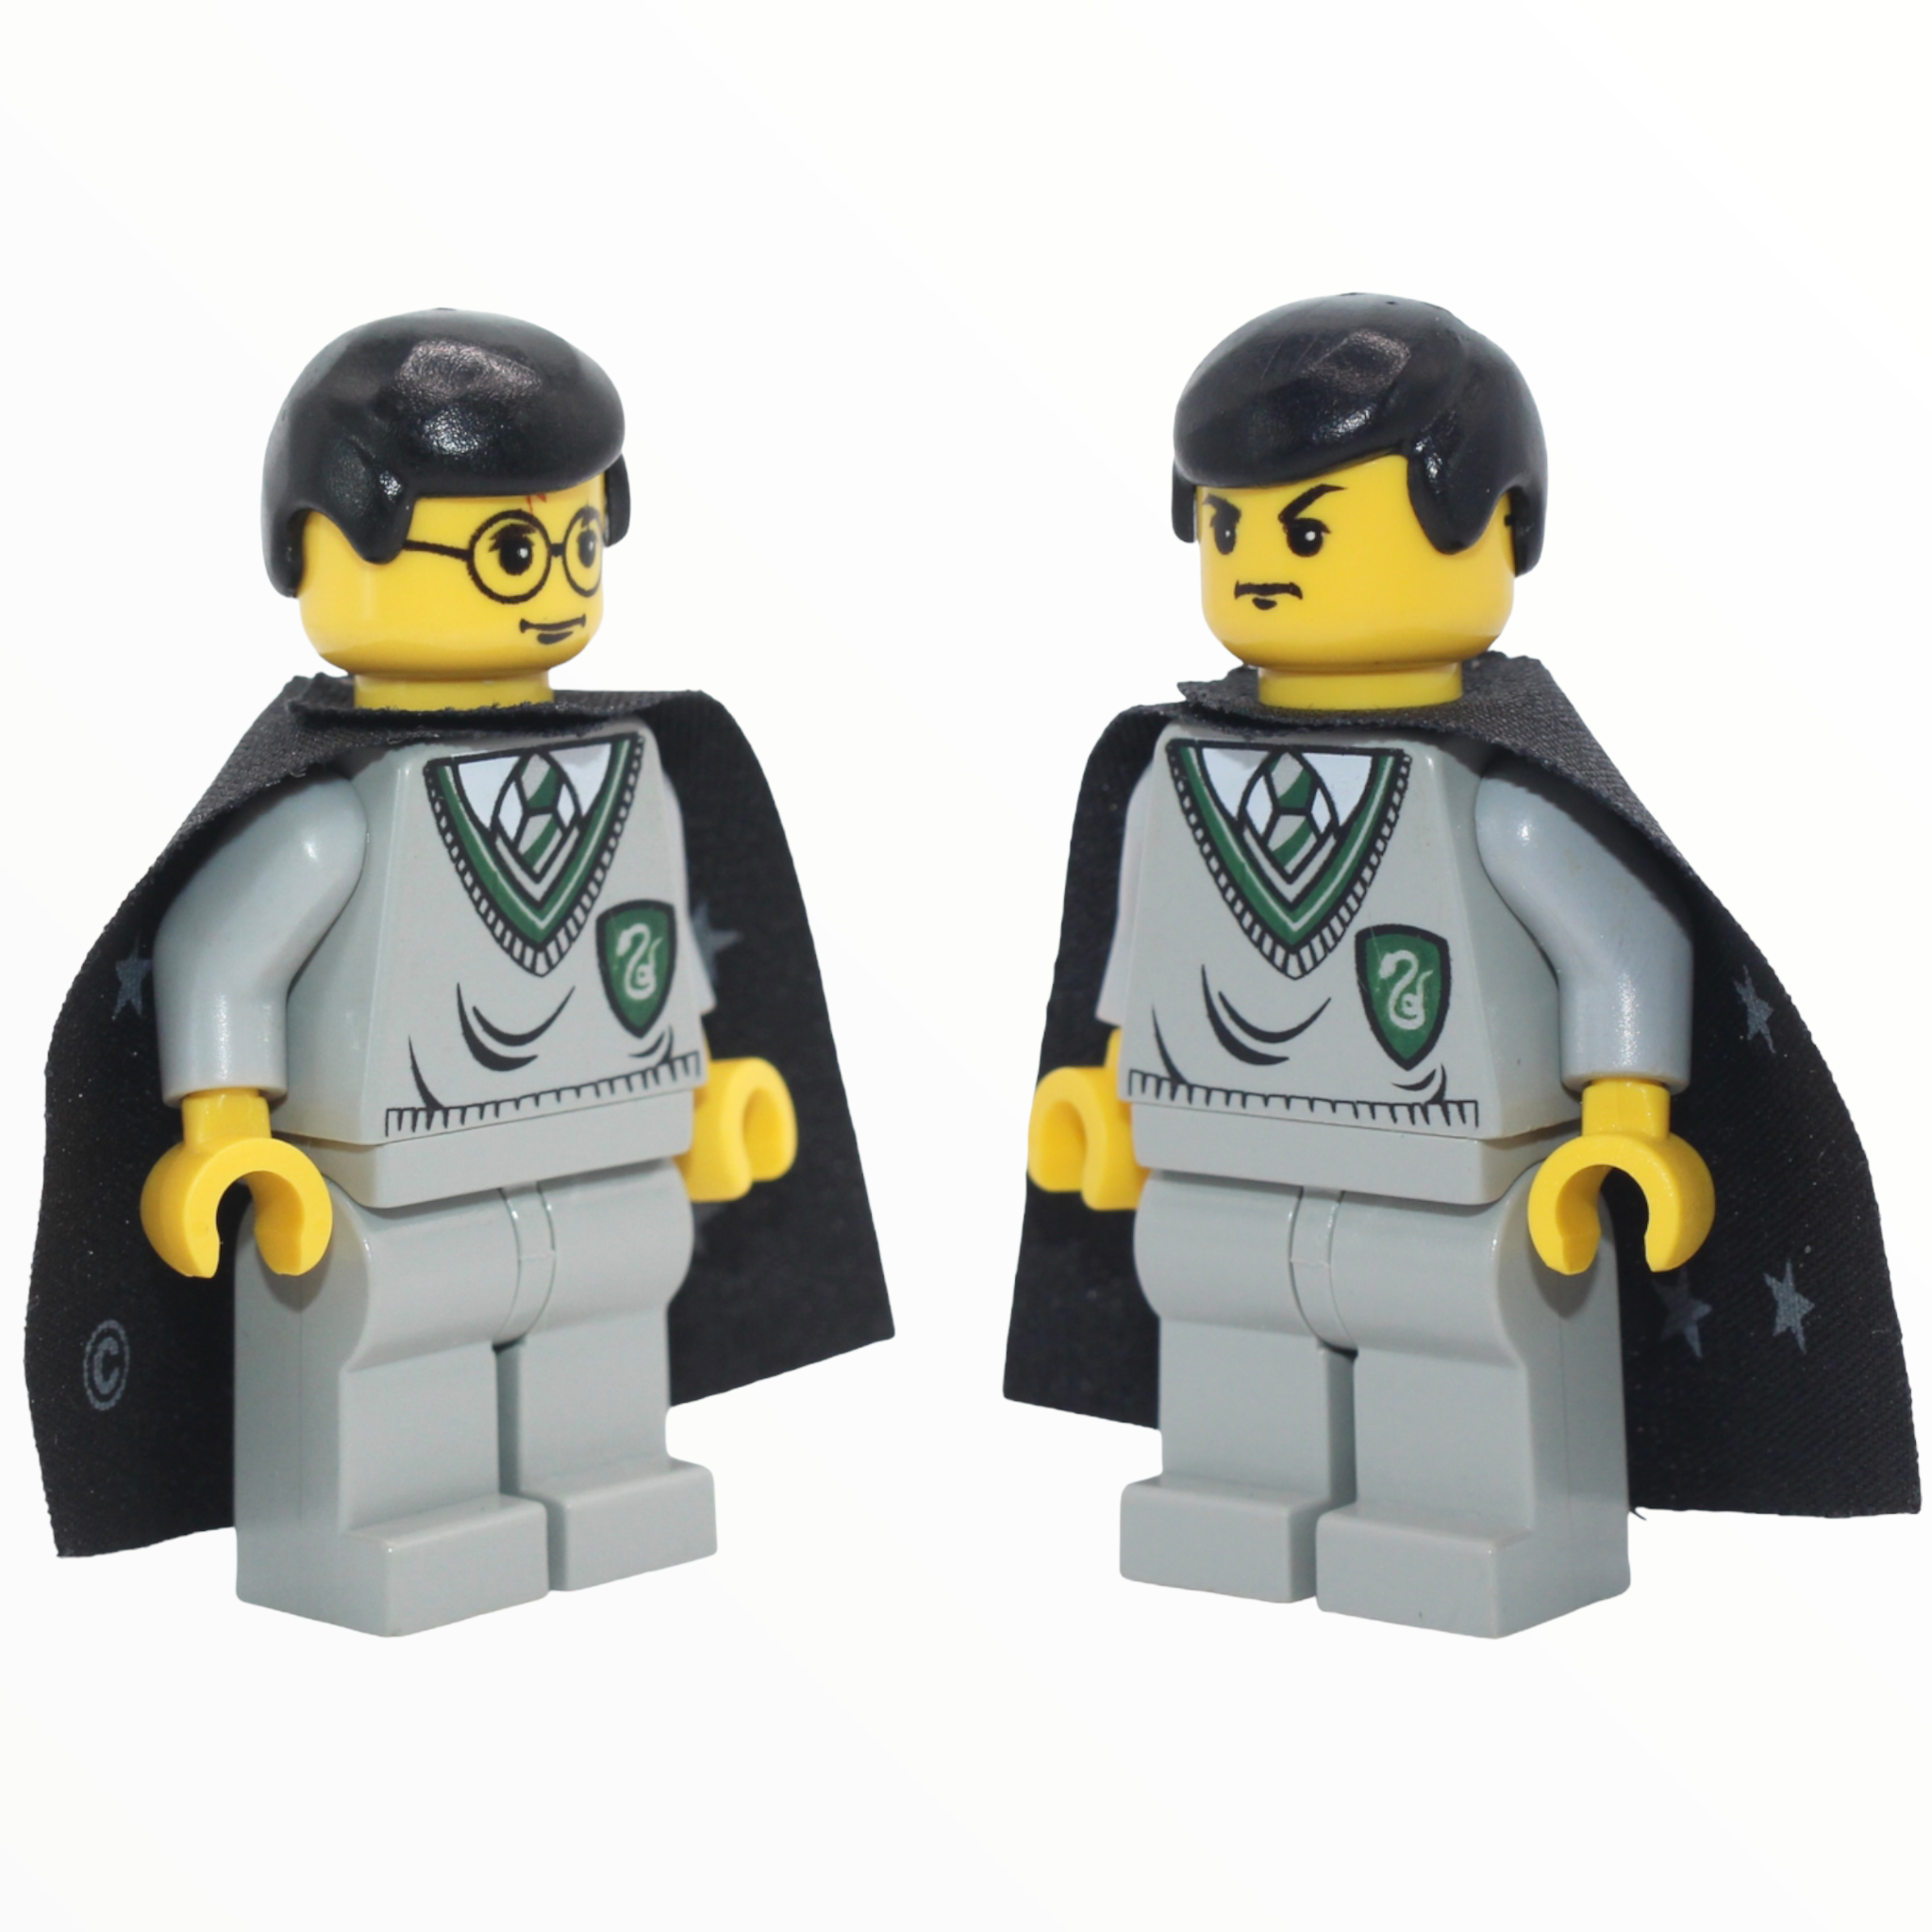 Harry Potter / Gregory Goyle (Slytherin sweater, star cape, yellow skin)